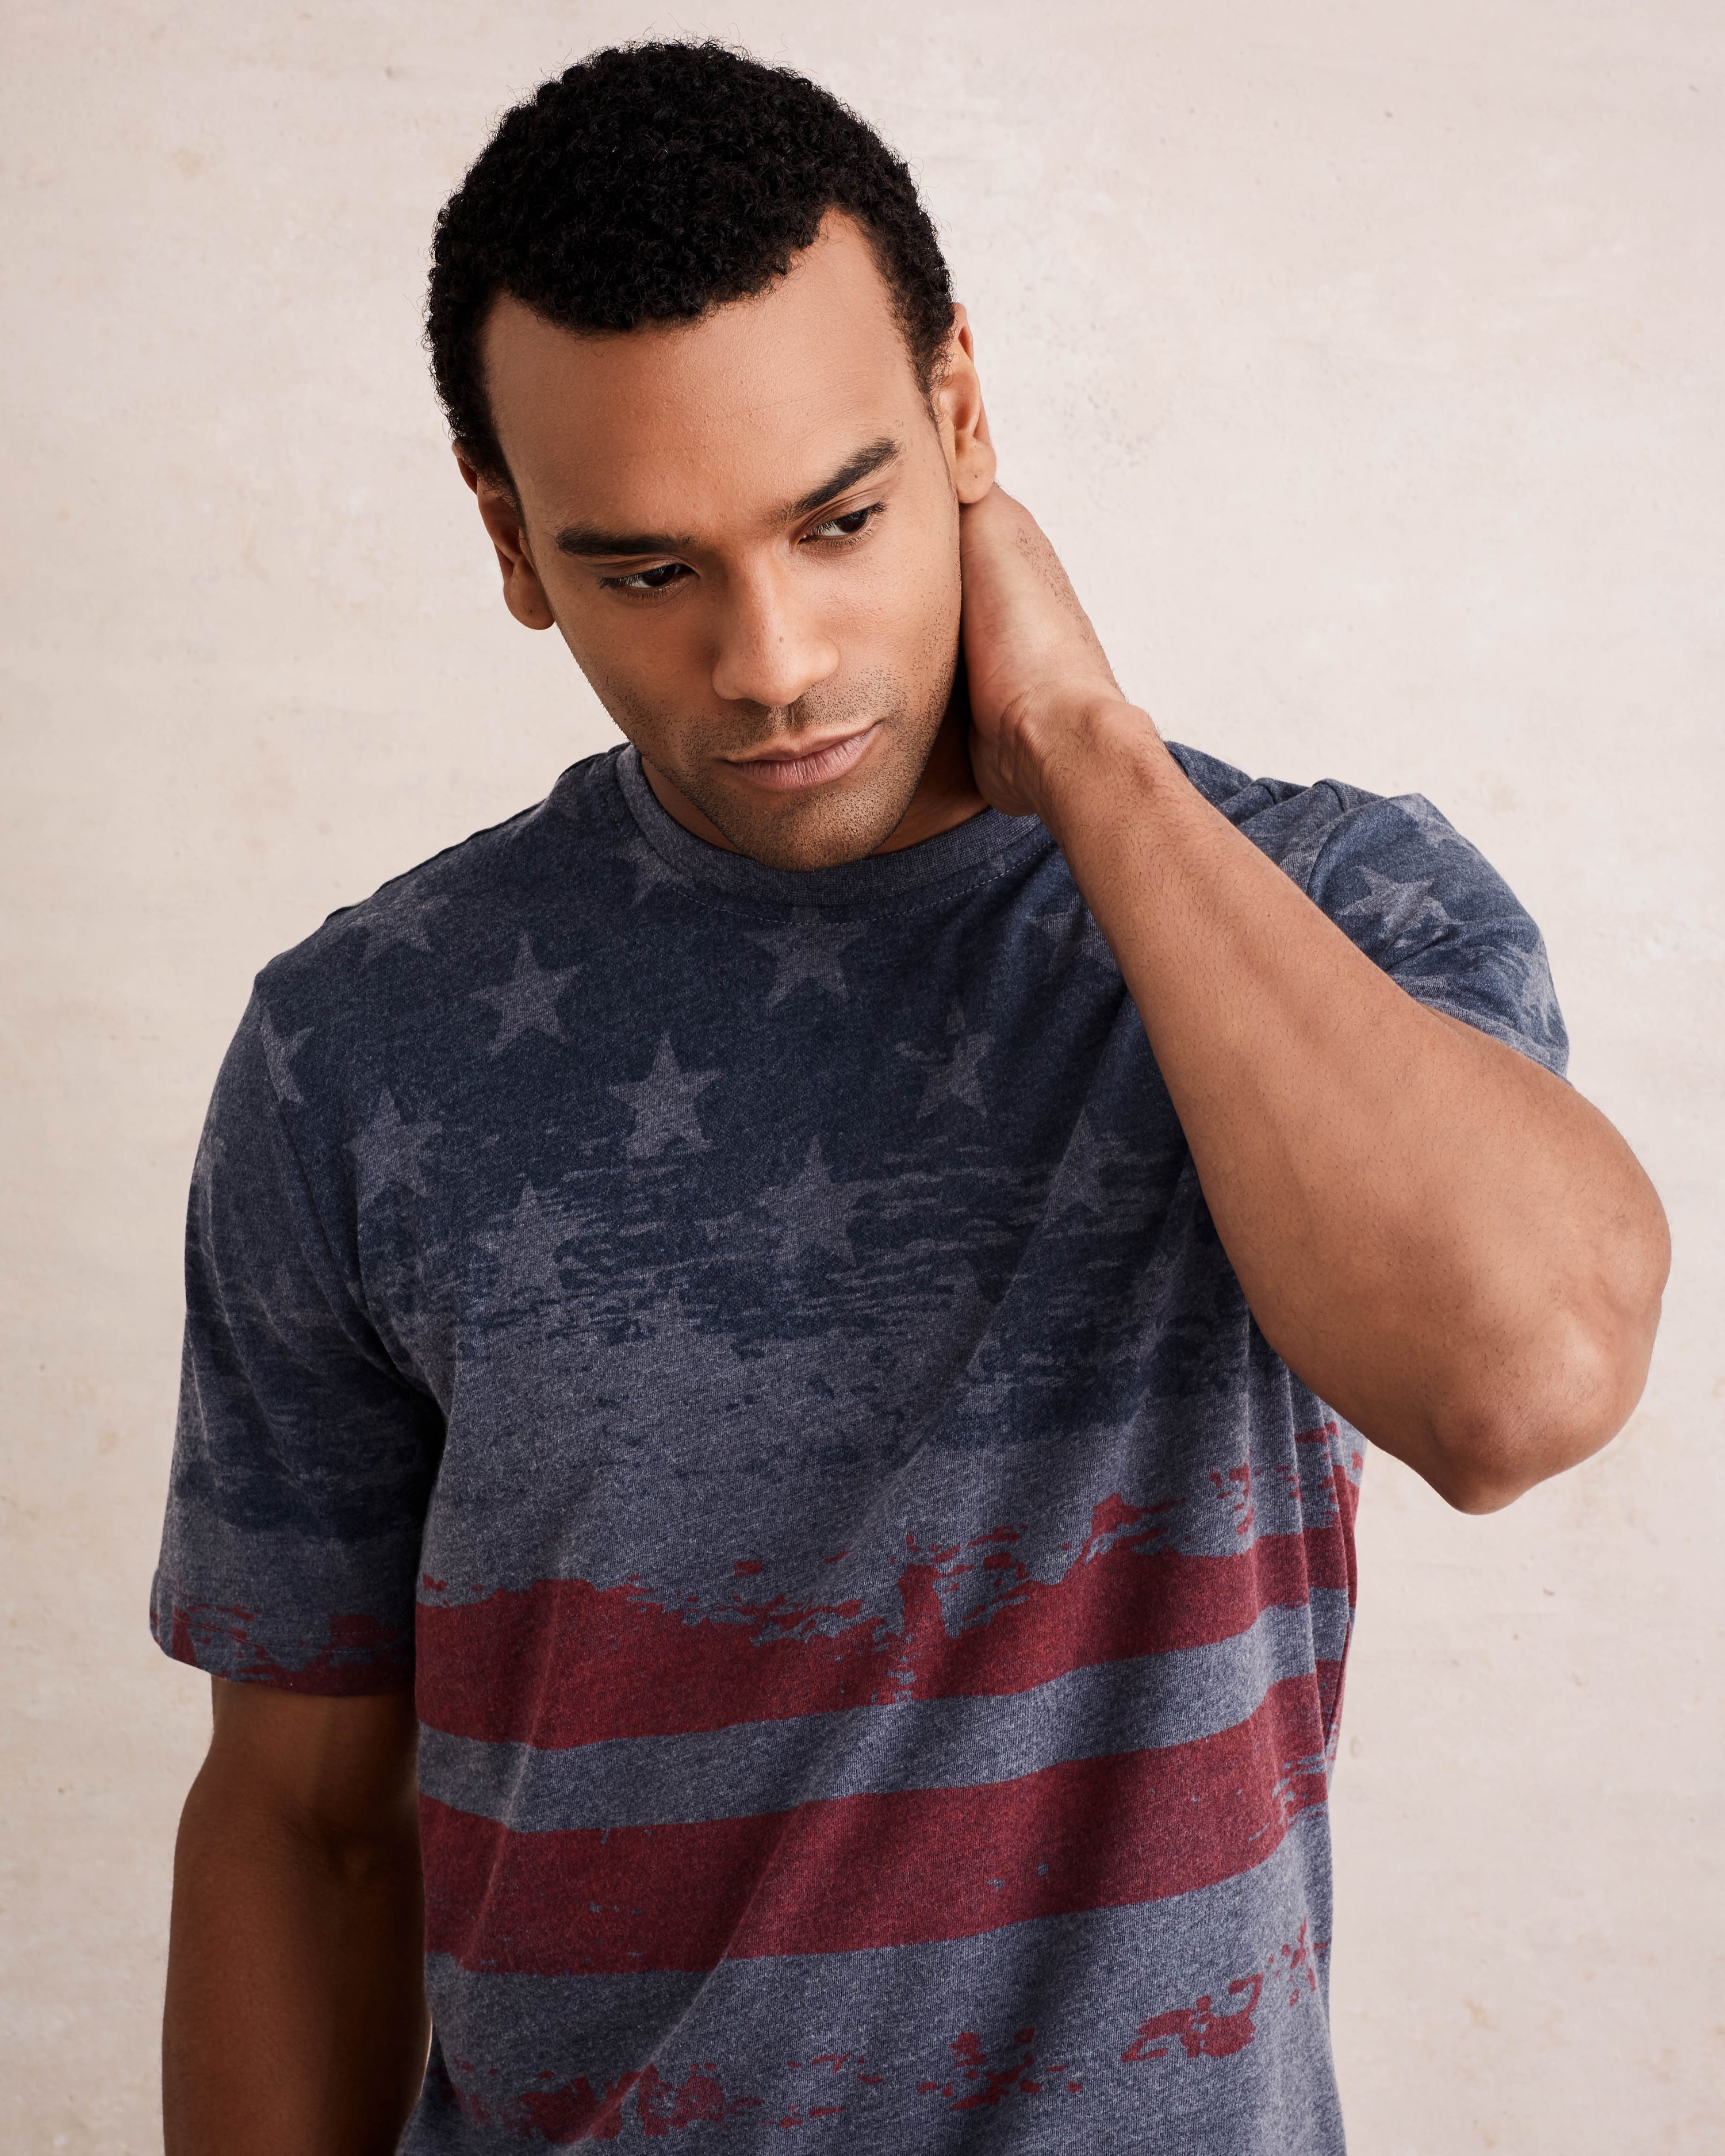 STARS AND STRIPES TEE  IN BLUE NIGHTS